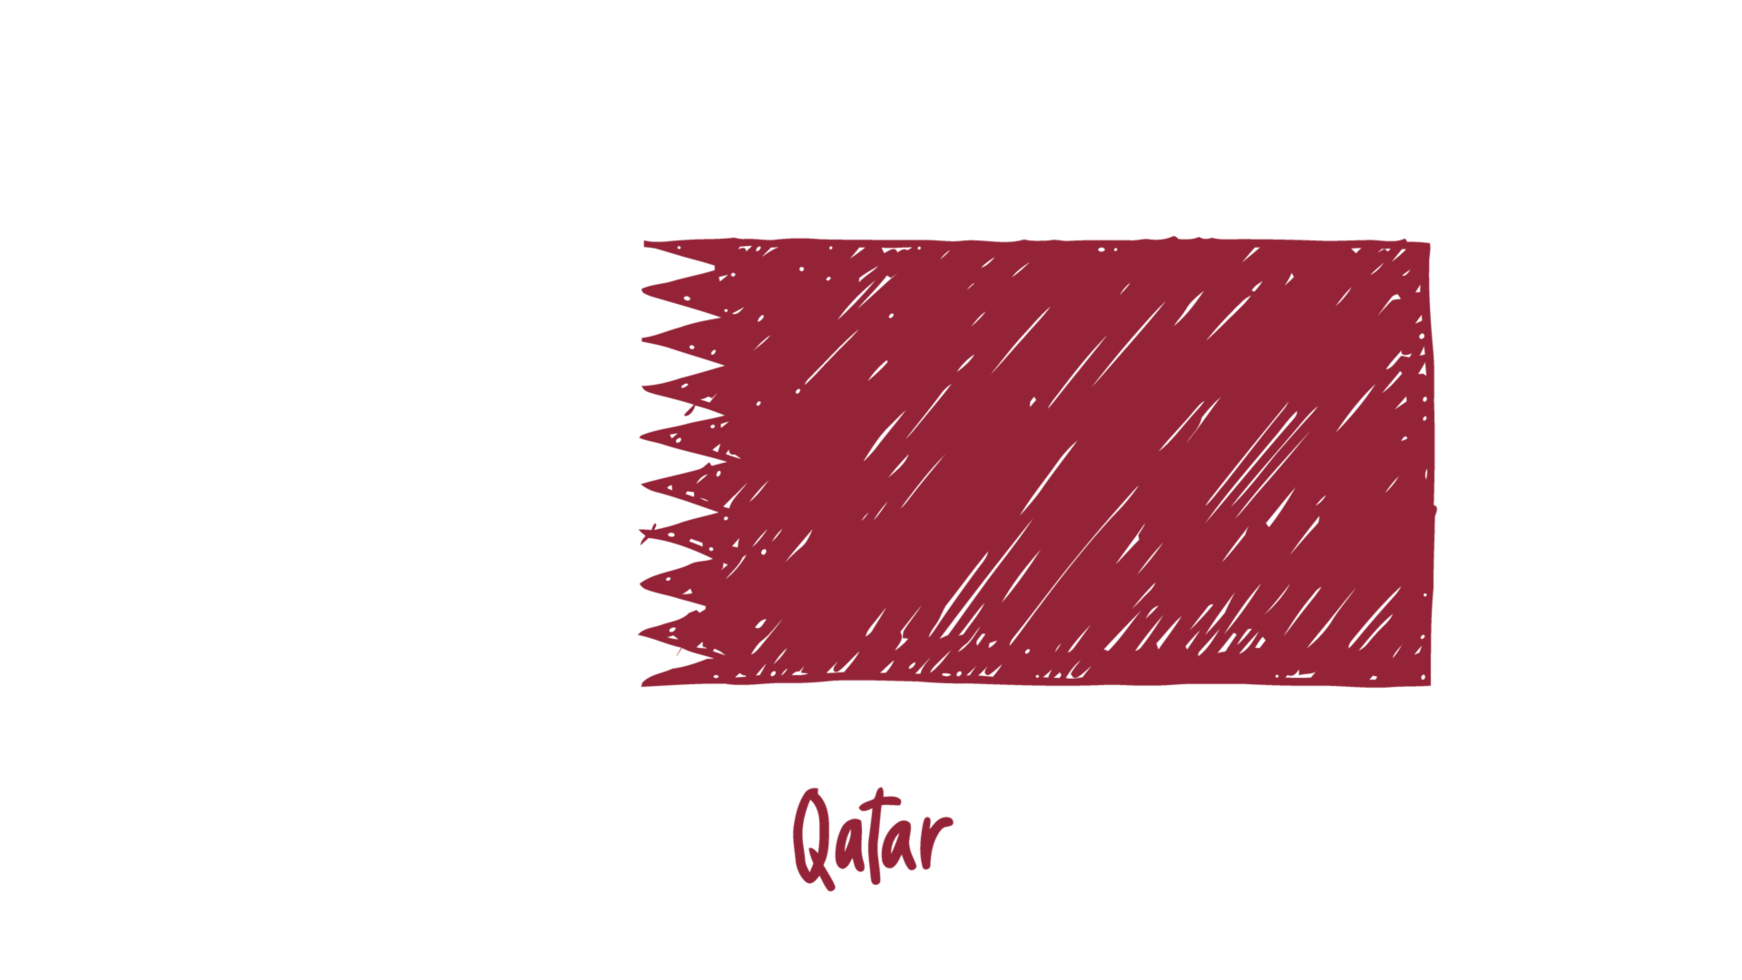 Qatar National Country Flag Pencil Color Sketch Illustration with Transparent Background png